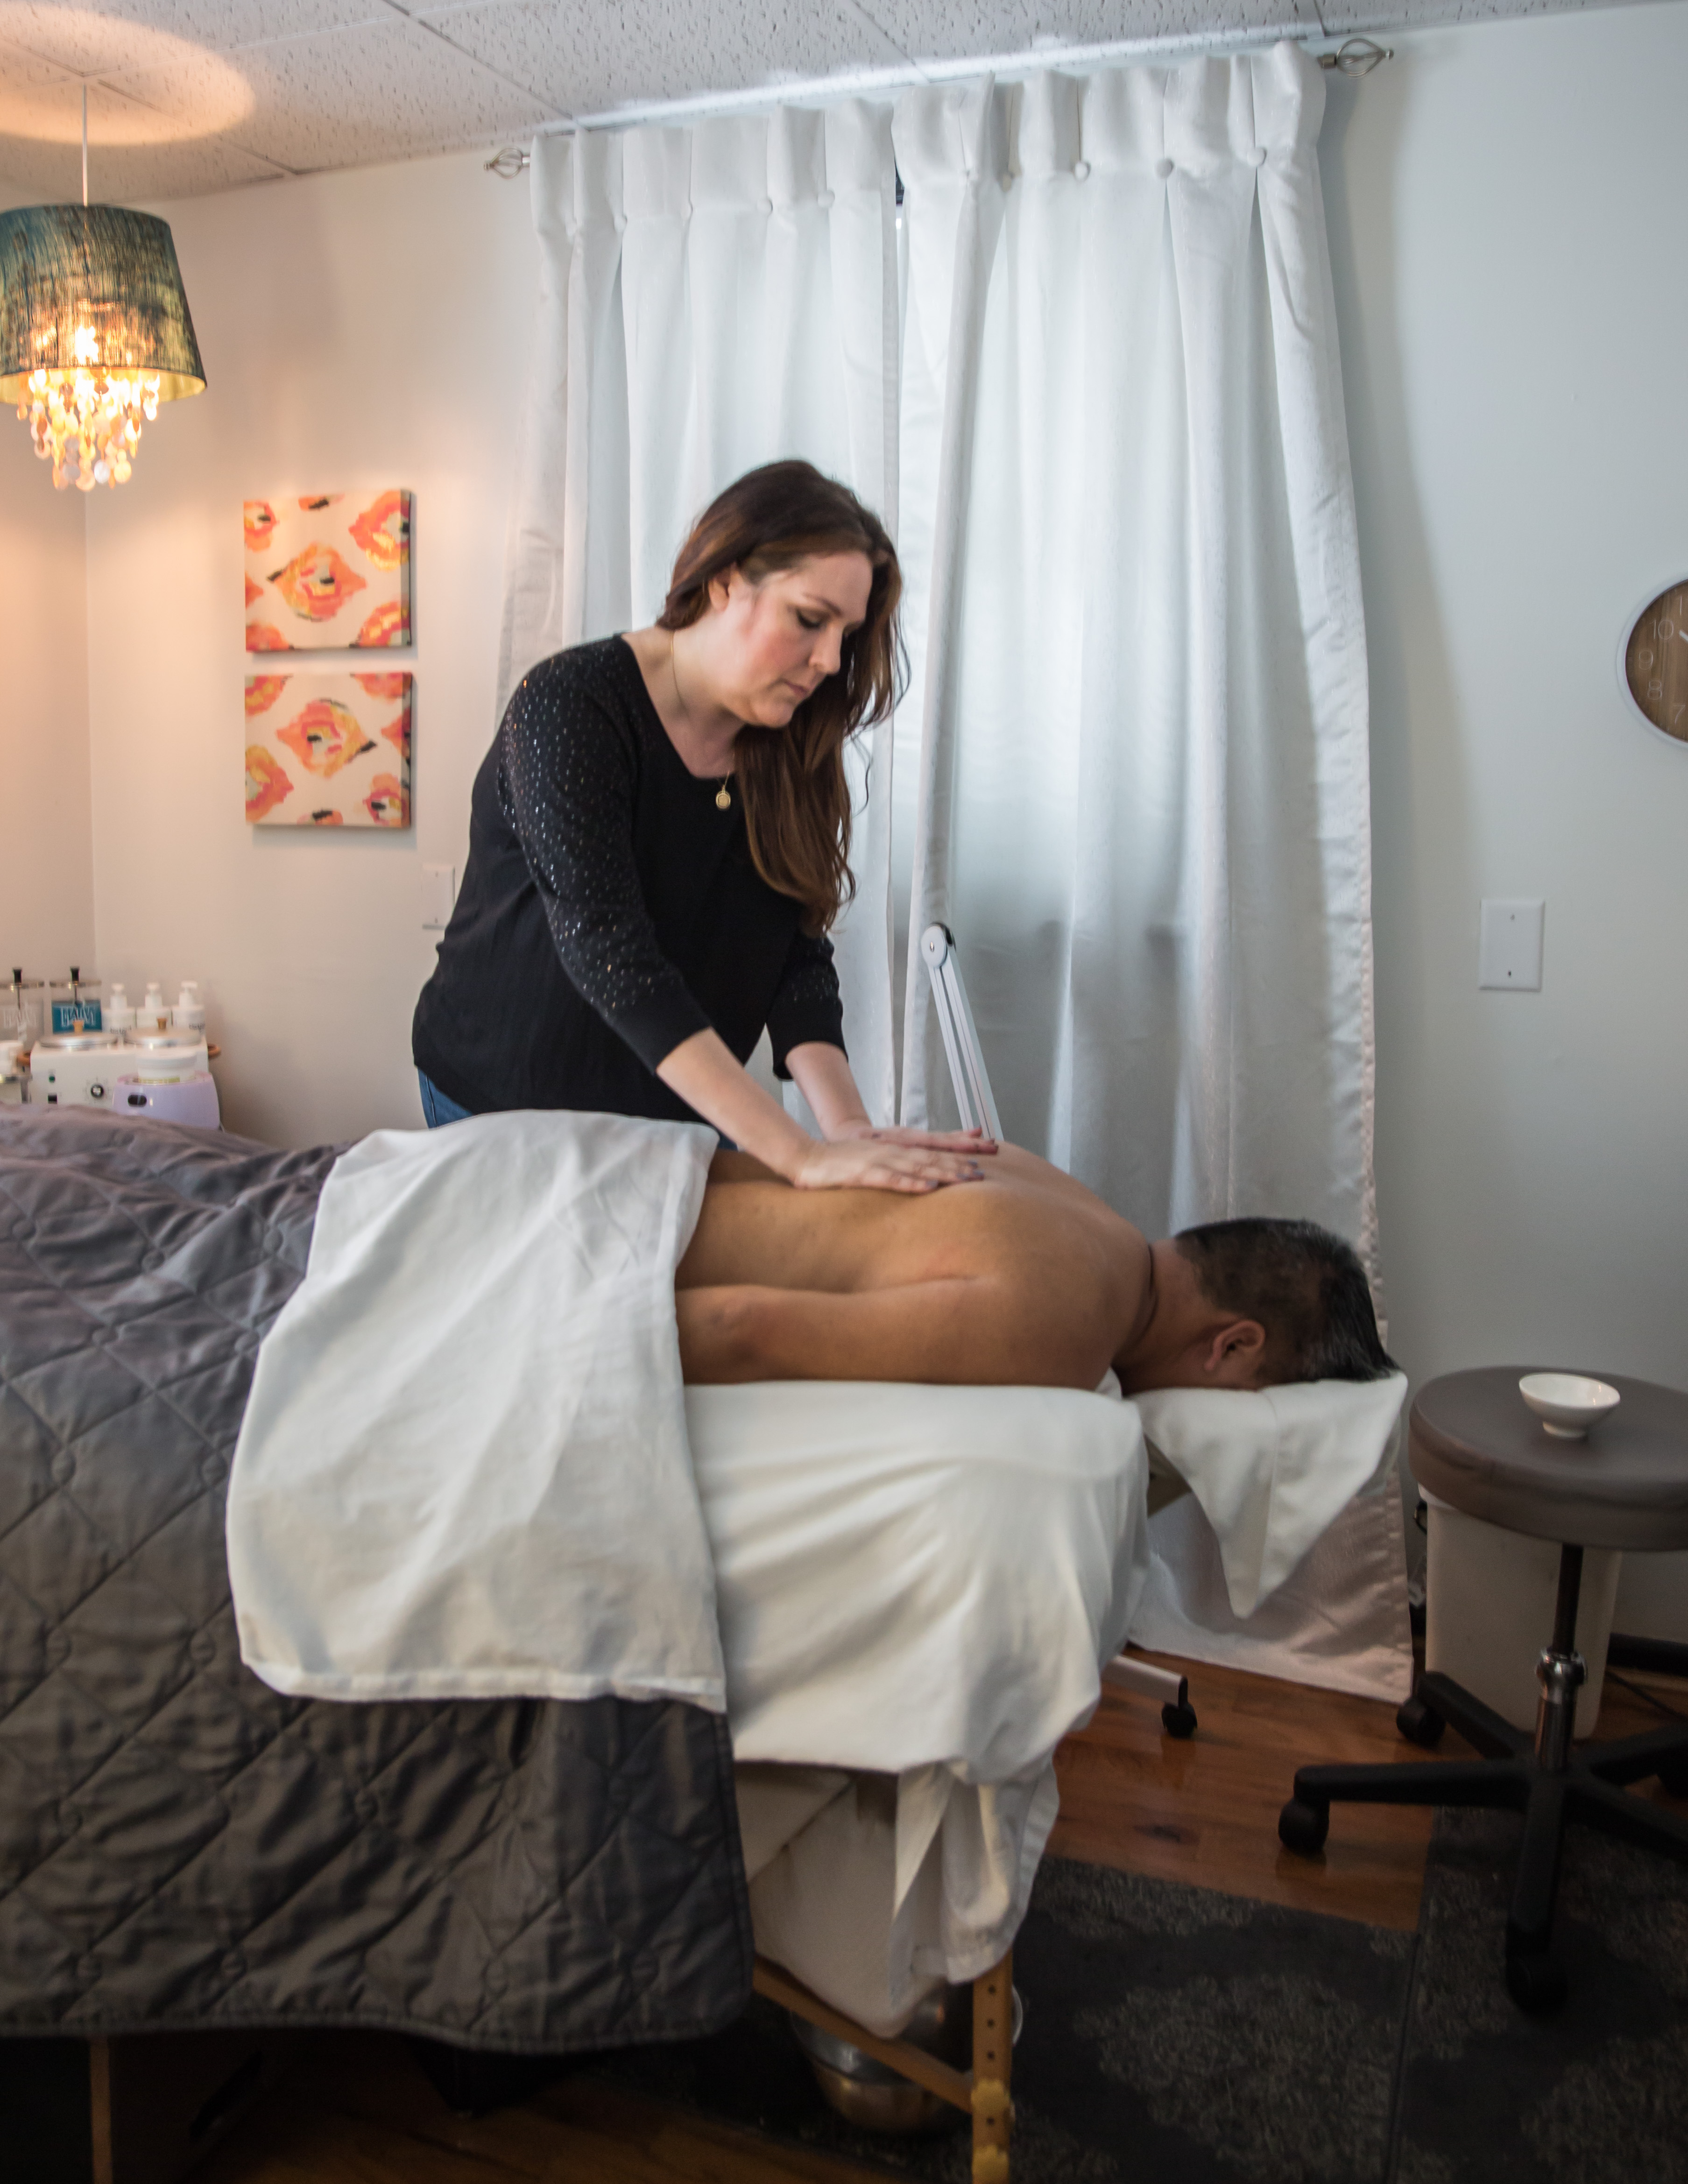 Massage therapist giving a back massage at a day spa